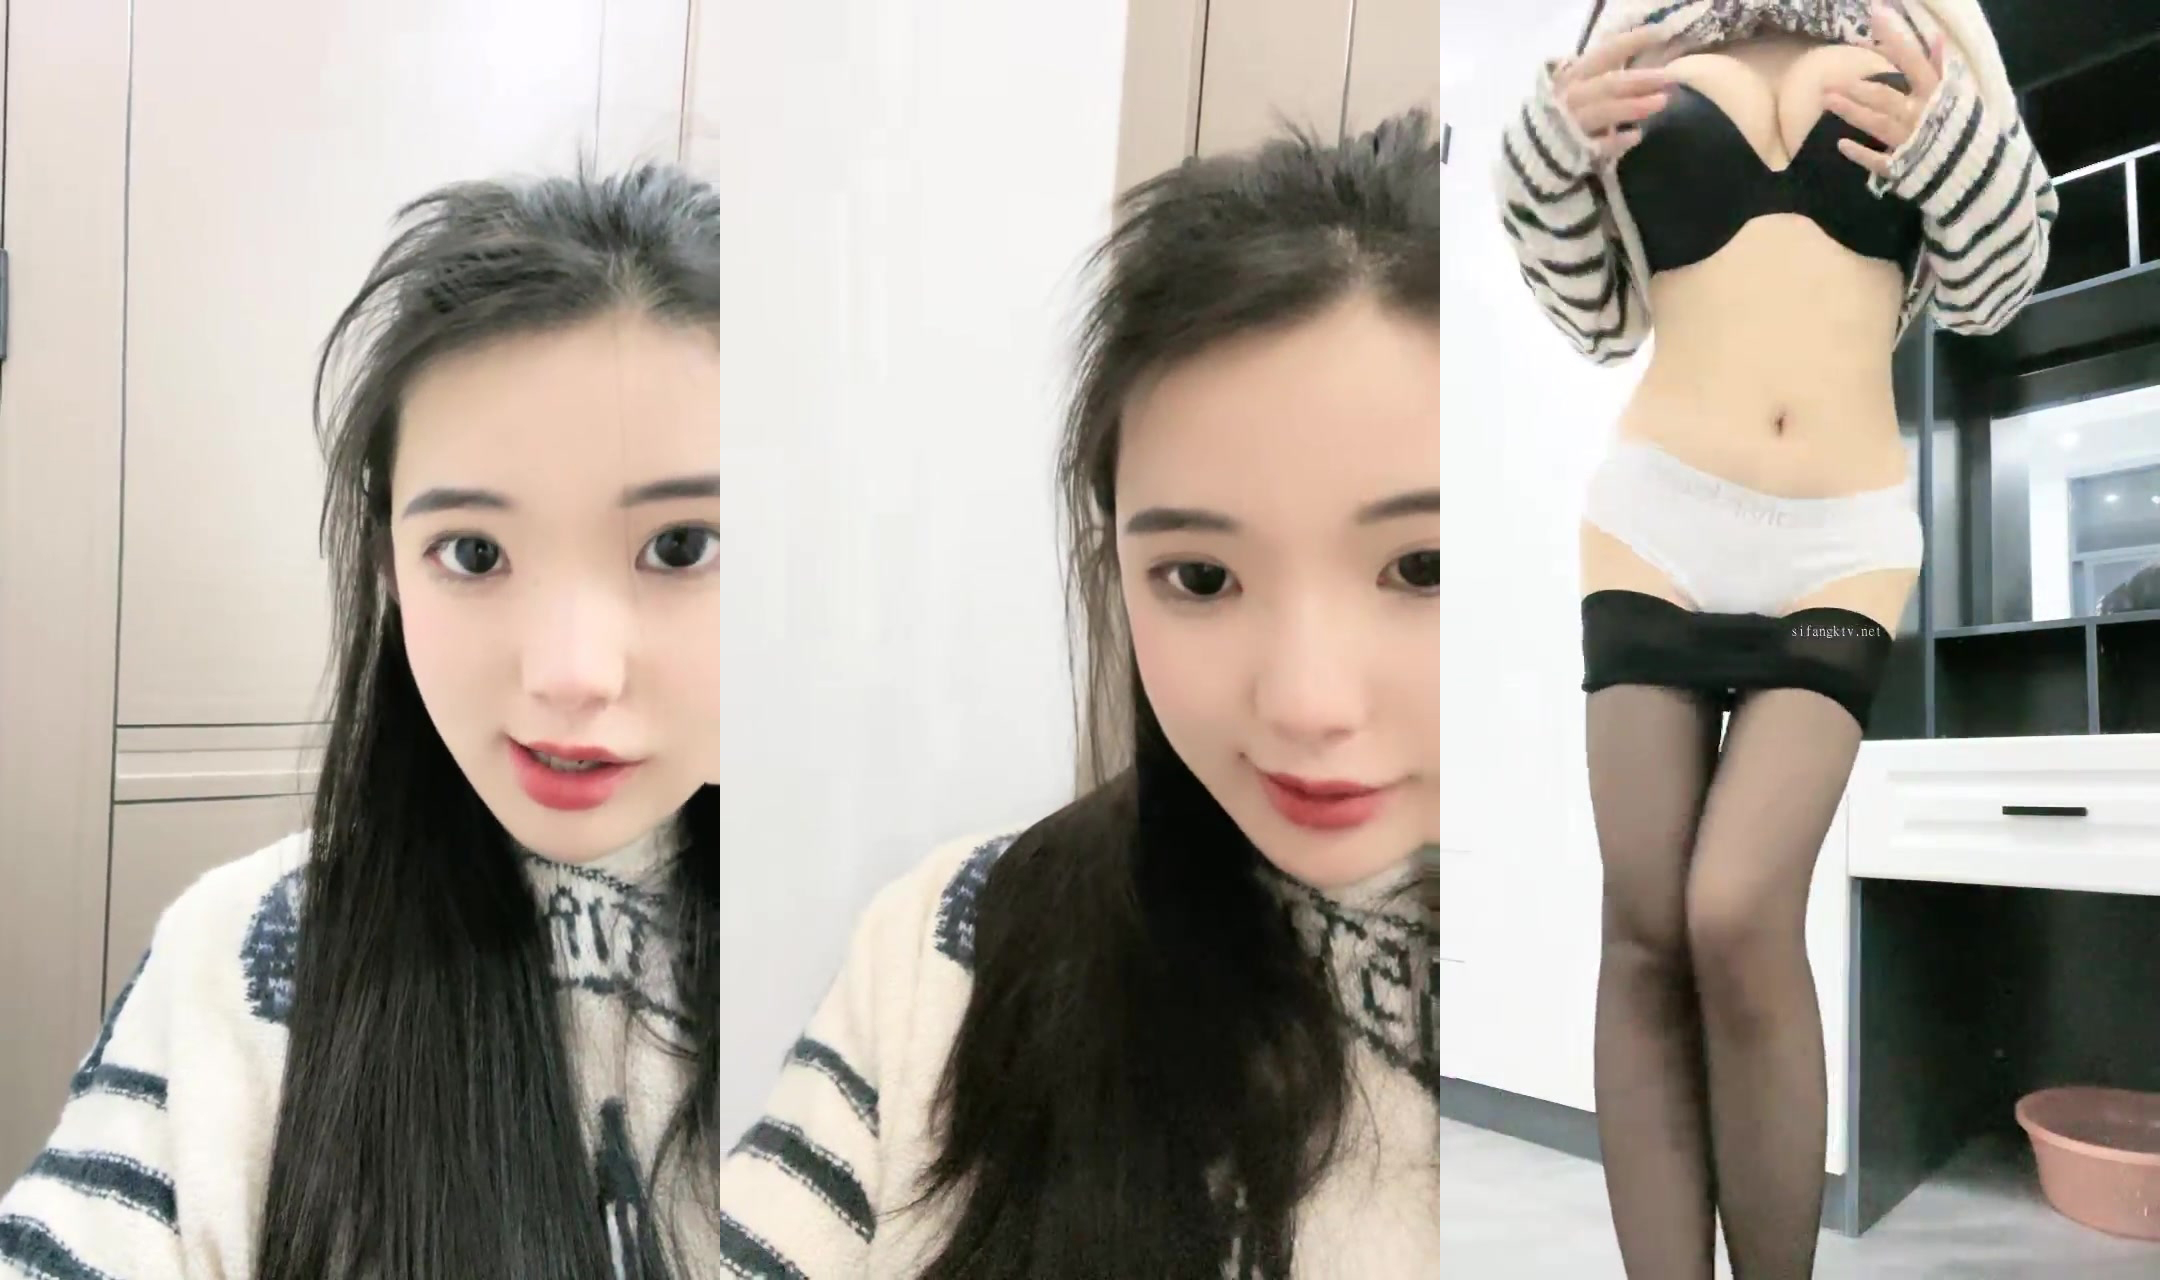 The G-tits schoolgirl from Suzhou is back in town! I'm not a schoolgirl (1)